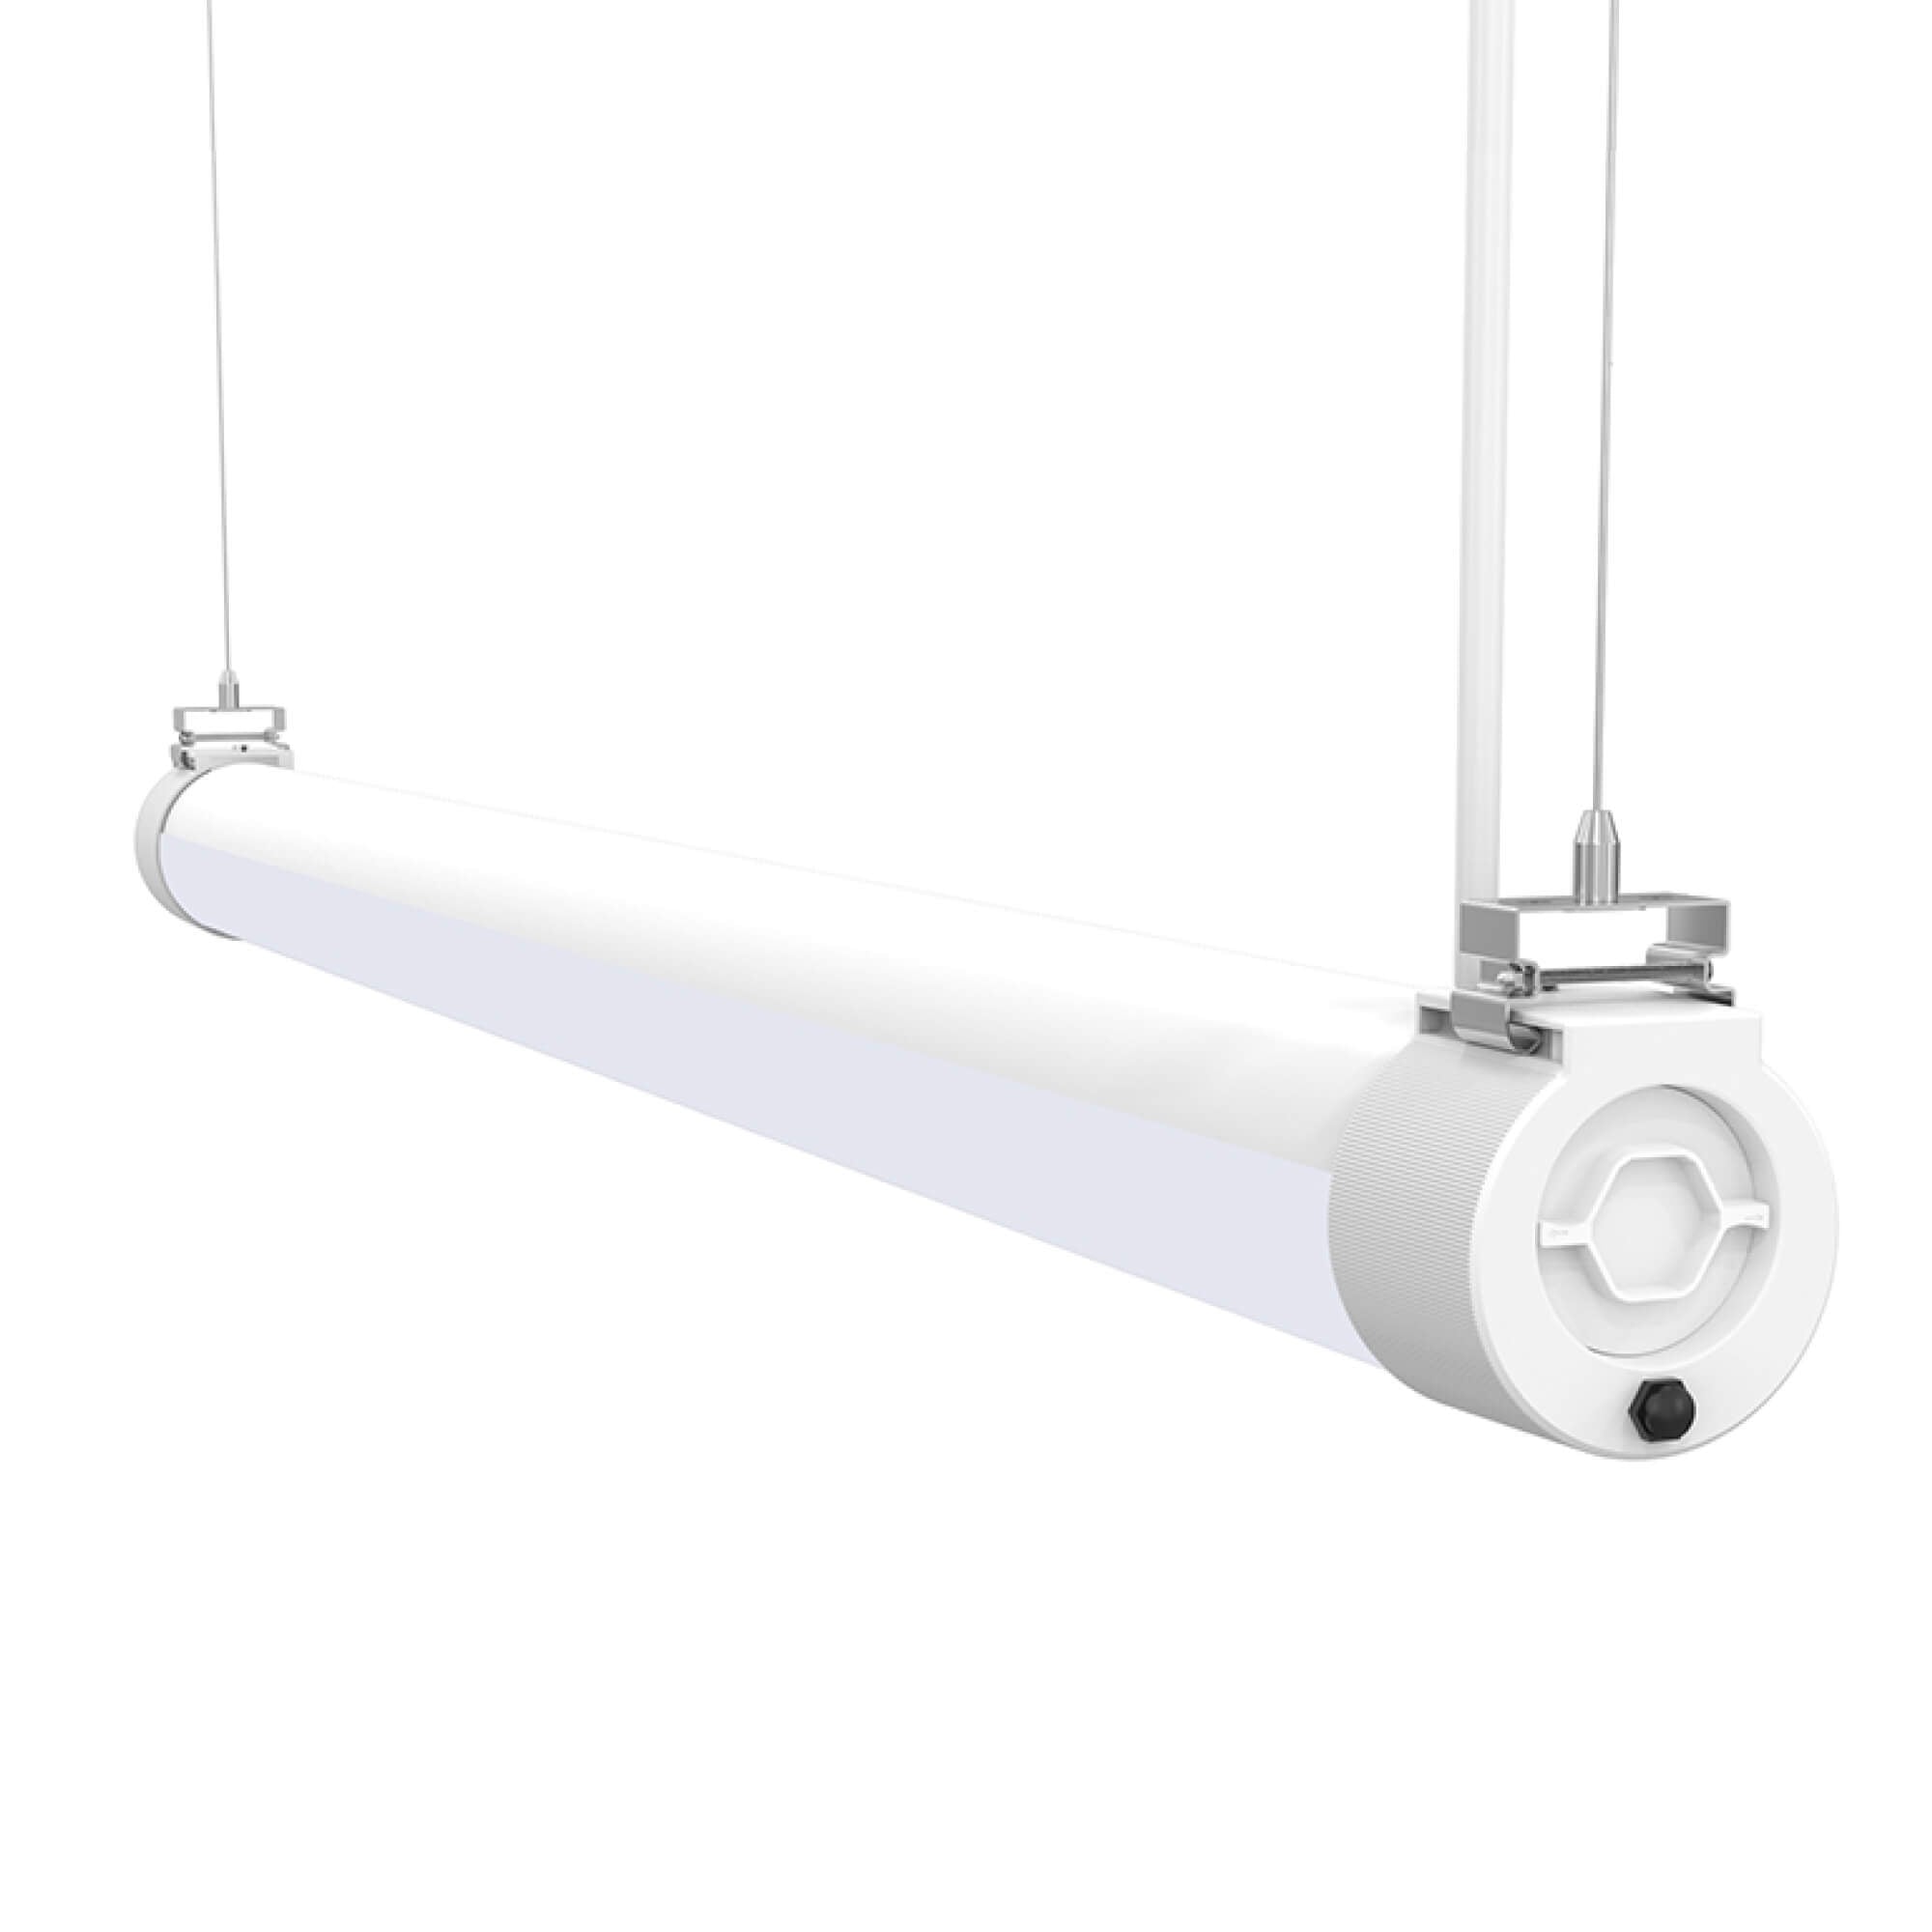 Halcon Lighting Vapor Tight LED light IP65 rated, suitable for harsh environments like industrial spaces, woodshops, and cold storage facilities.